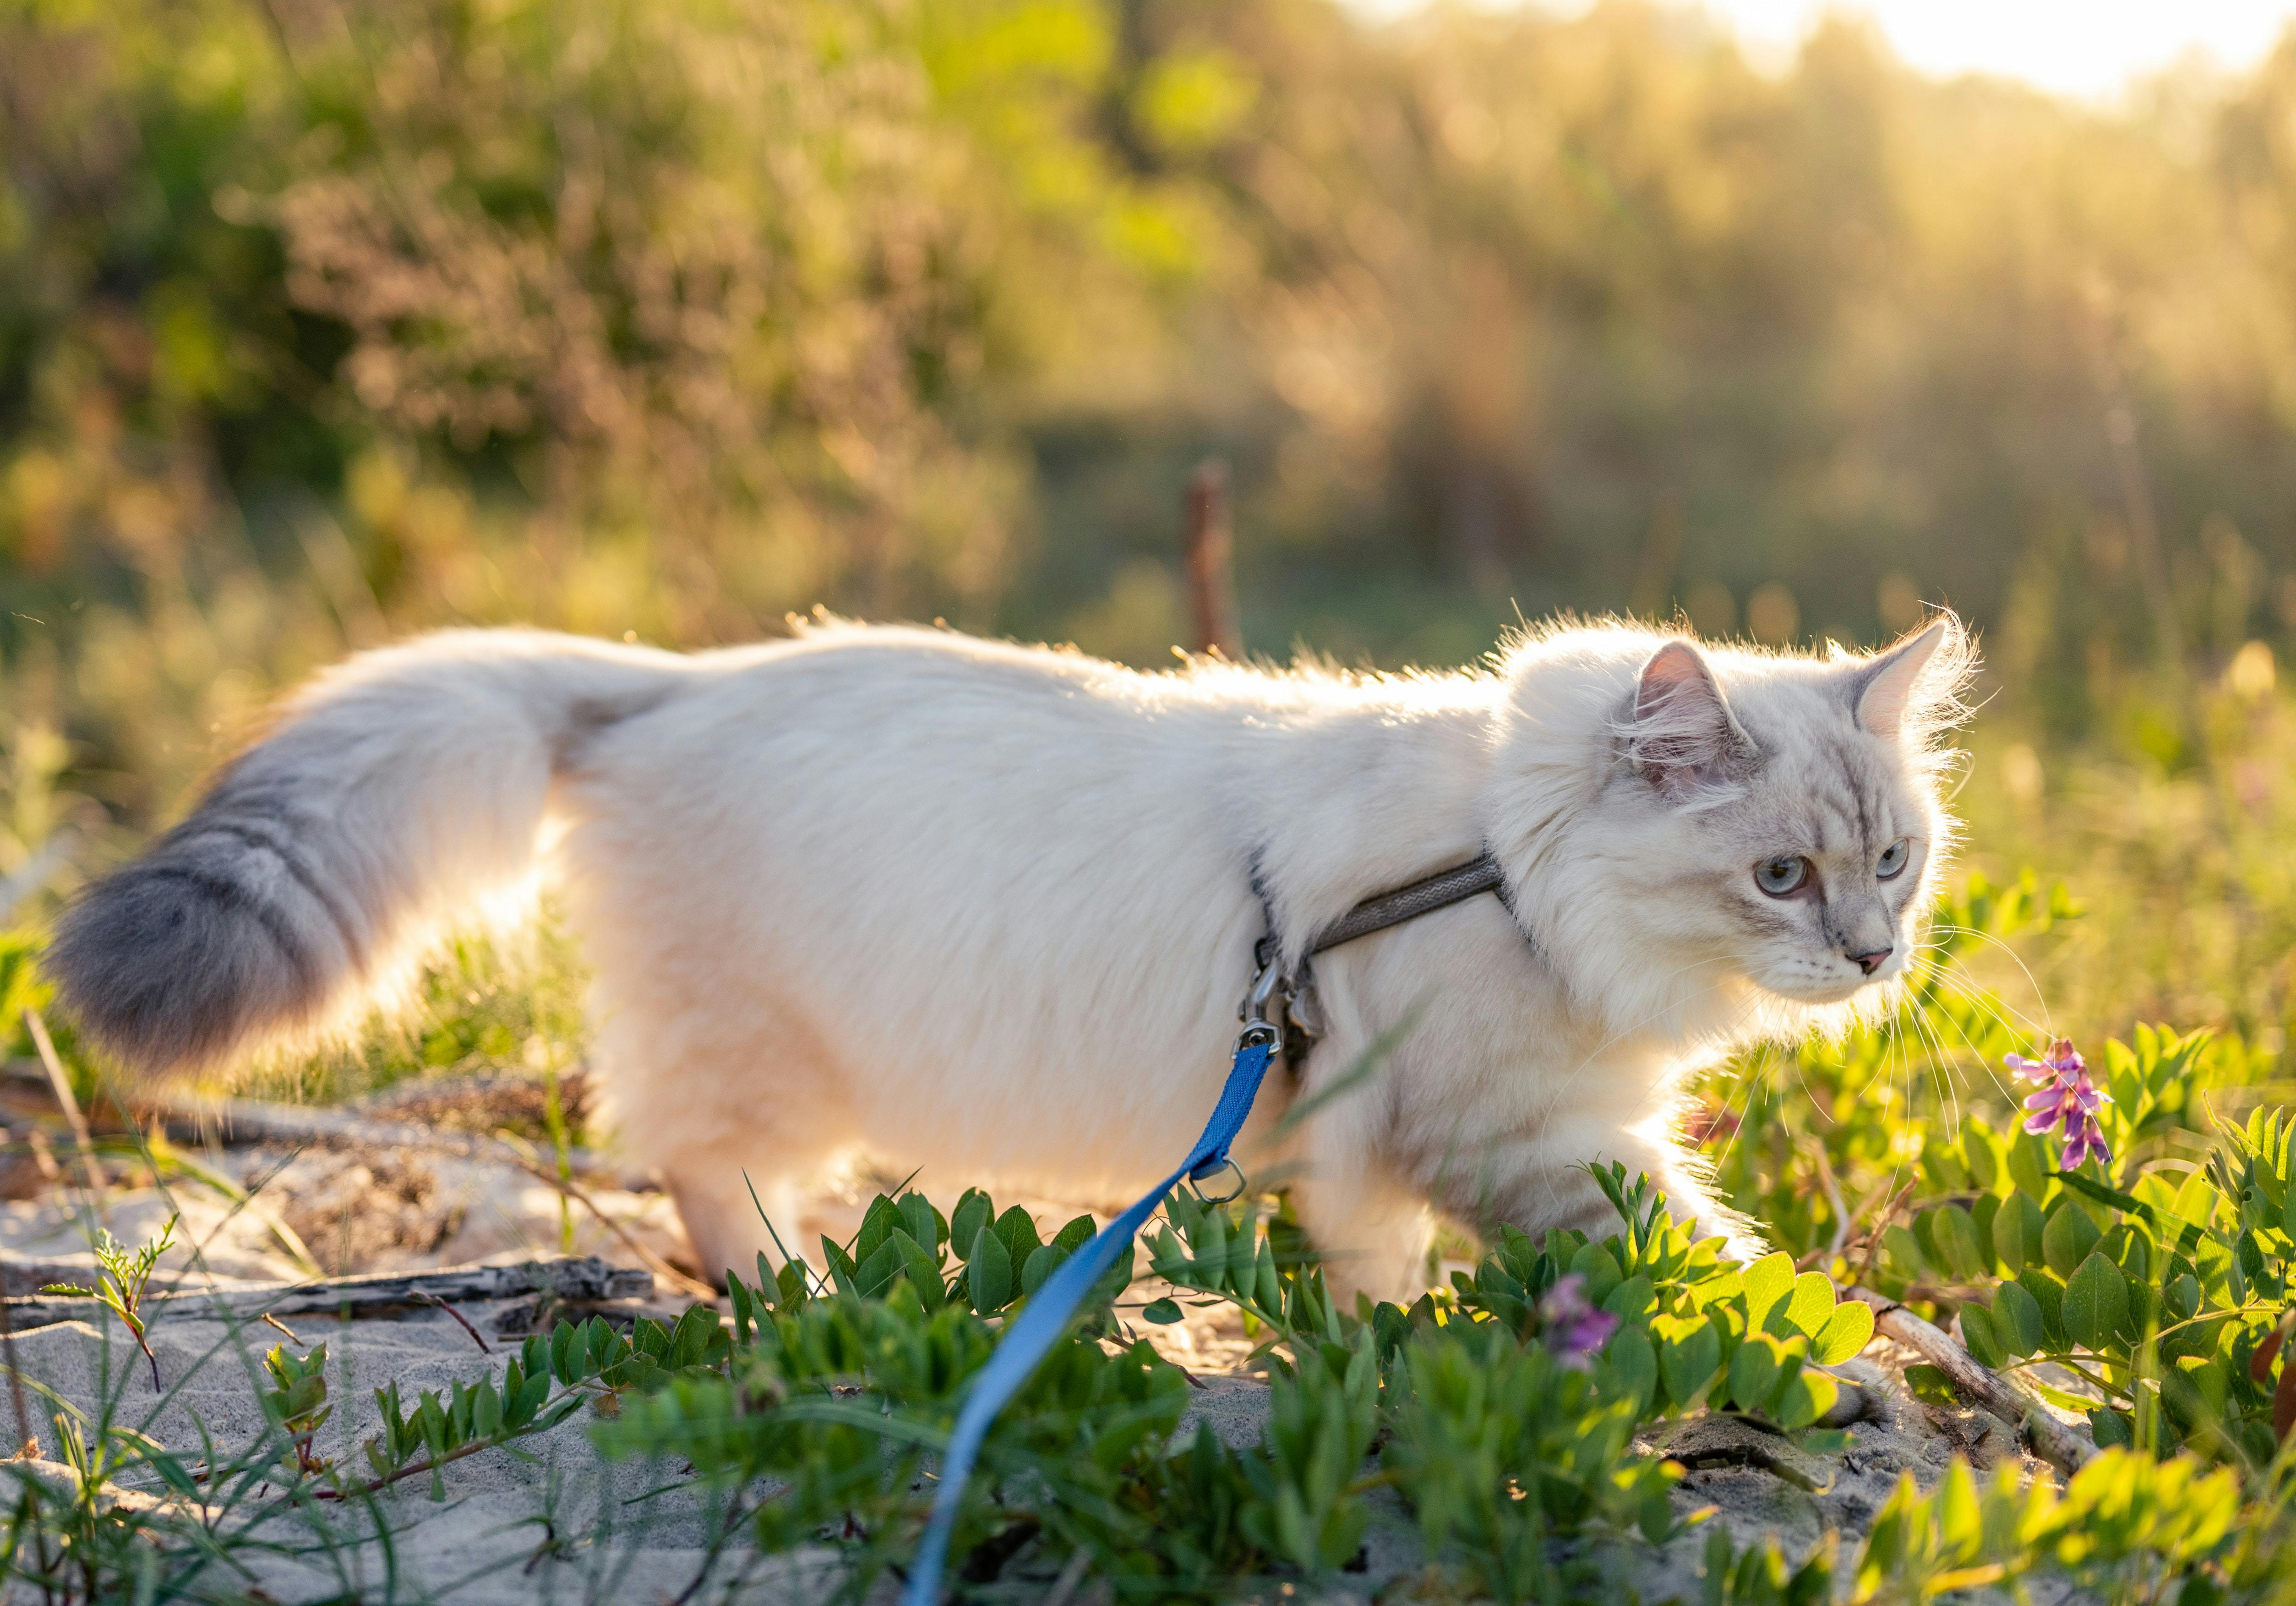 Cat on a leash enjoying a sunny outdoor walk at the park